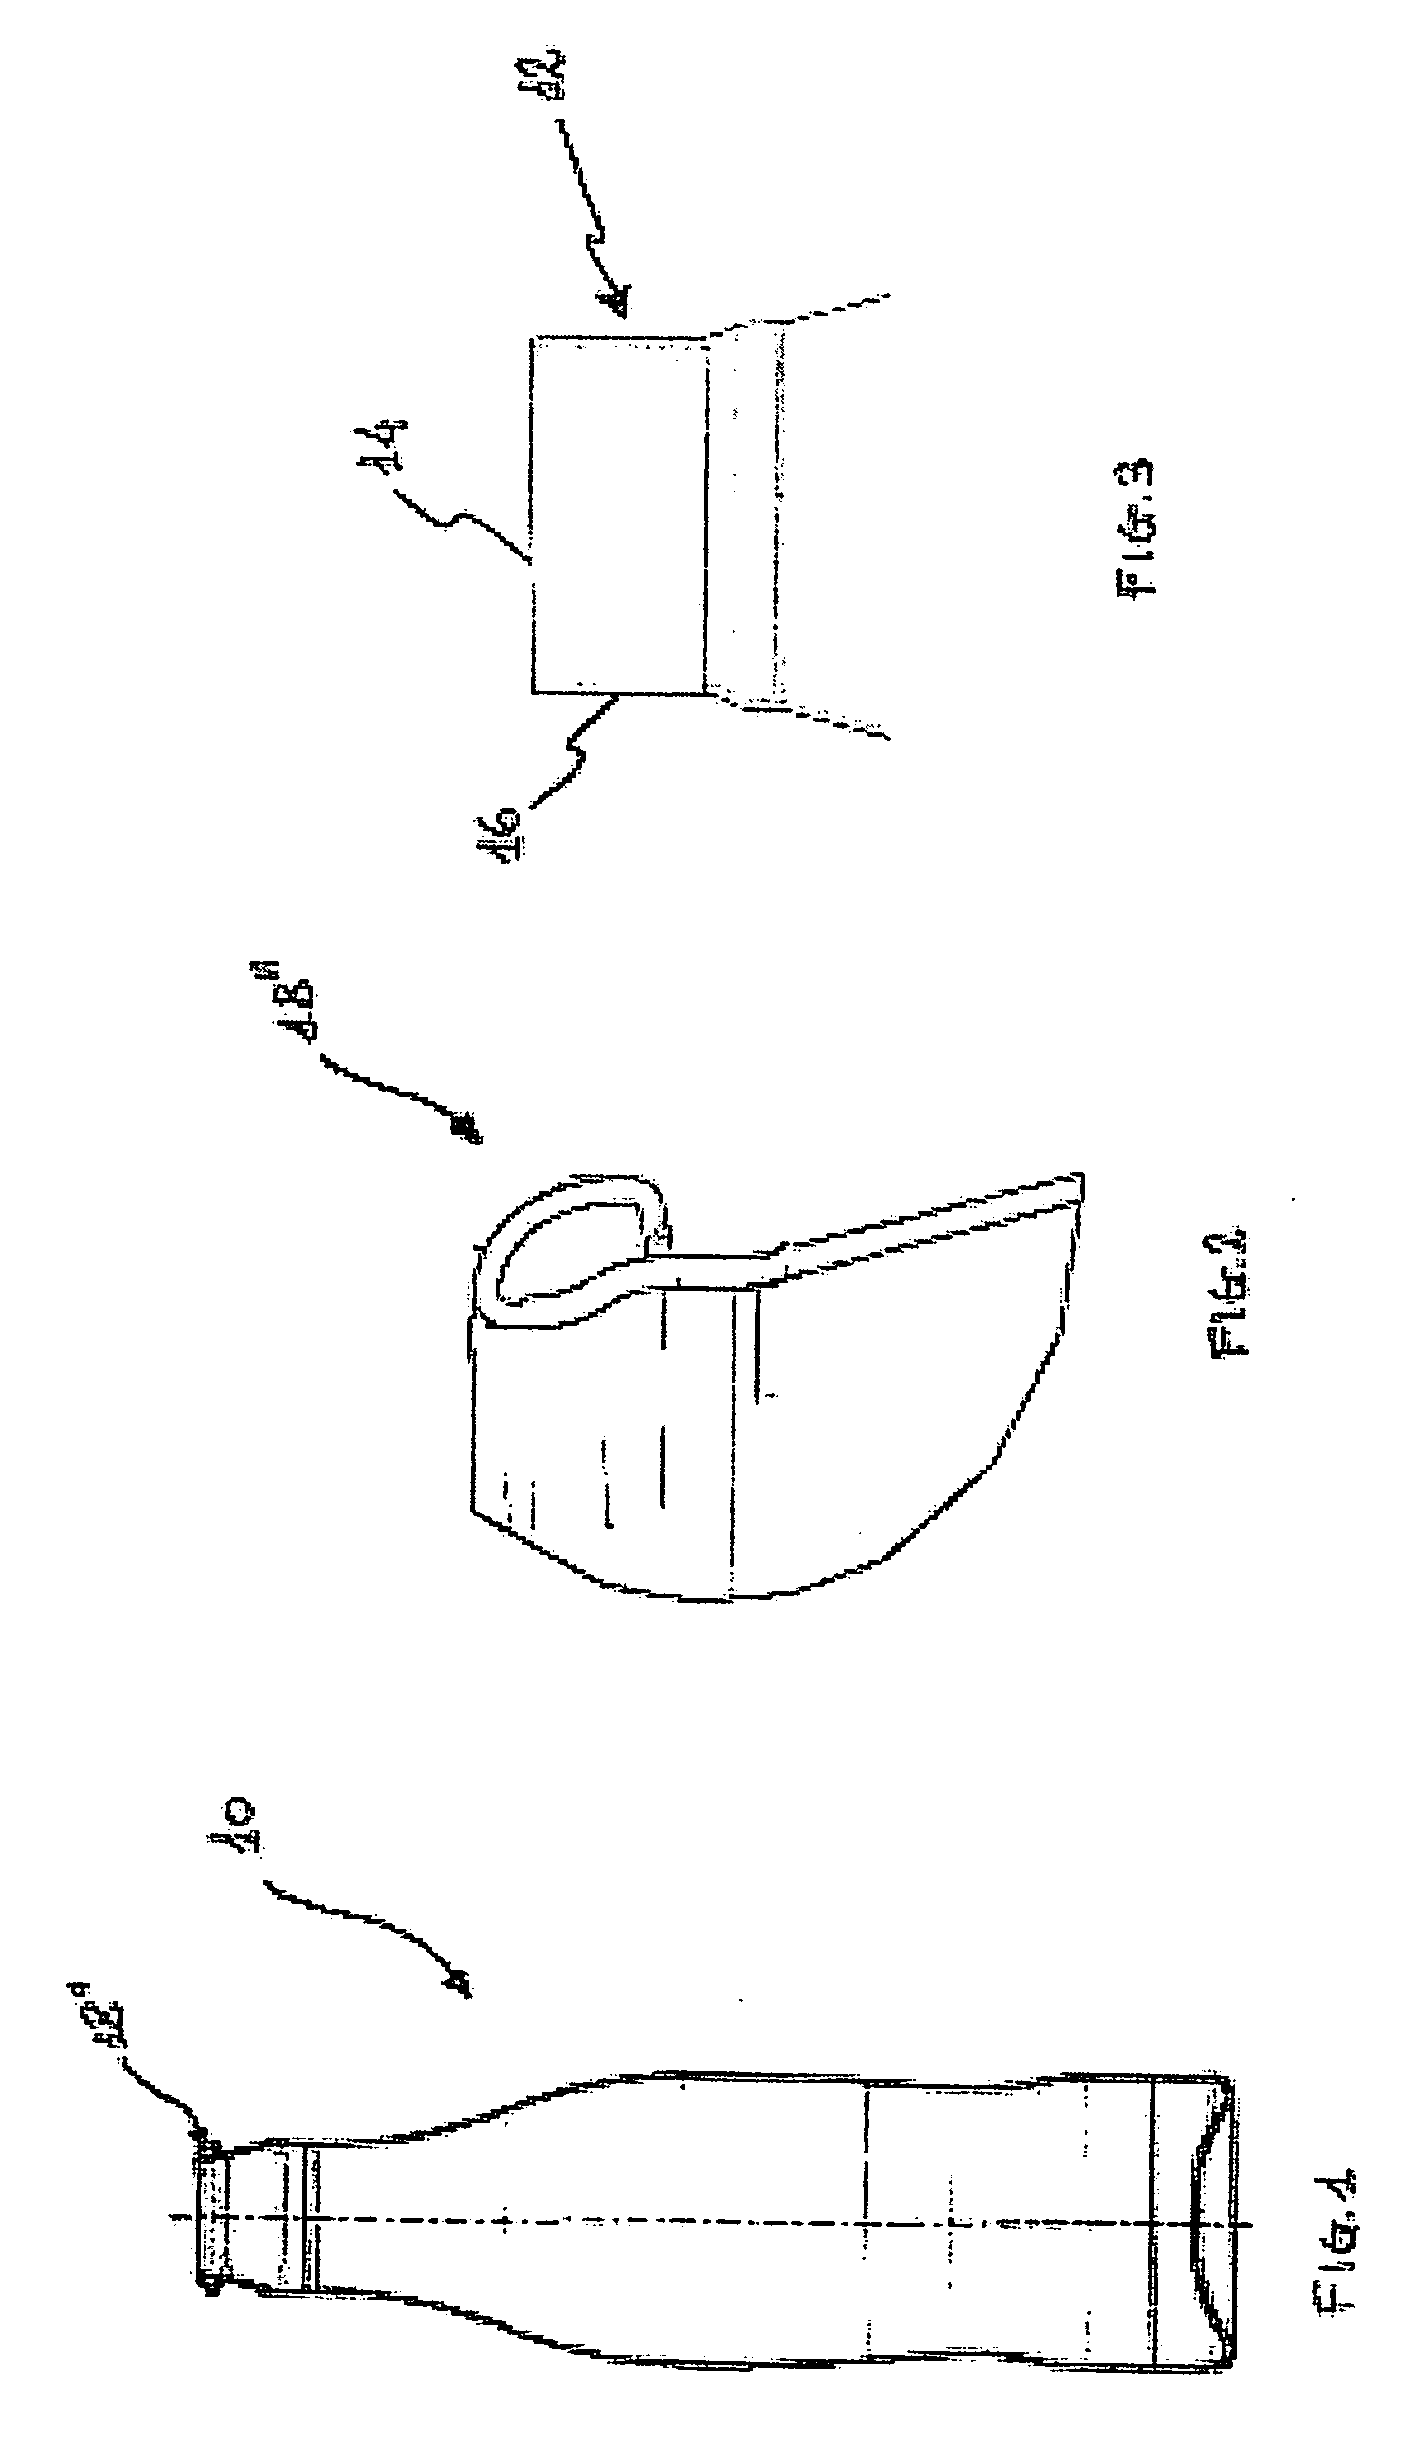 Process and Apparatus to Make an Edge or a Collar Featuring a Complex Structure on Metal Rough Pieces